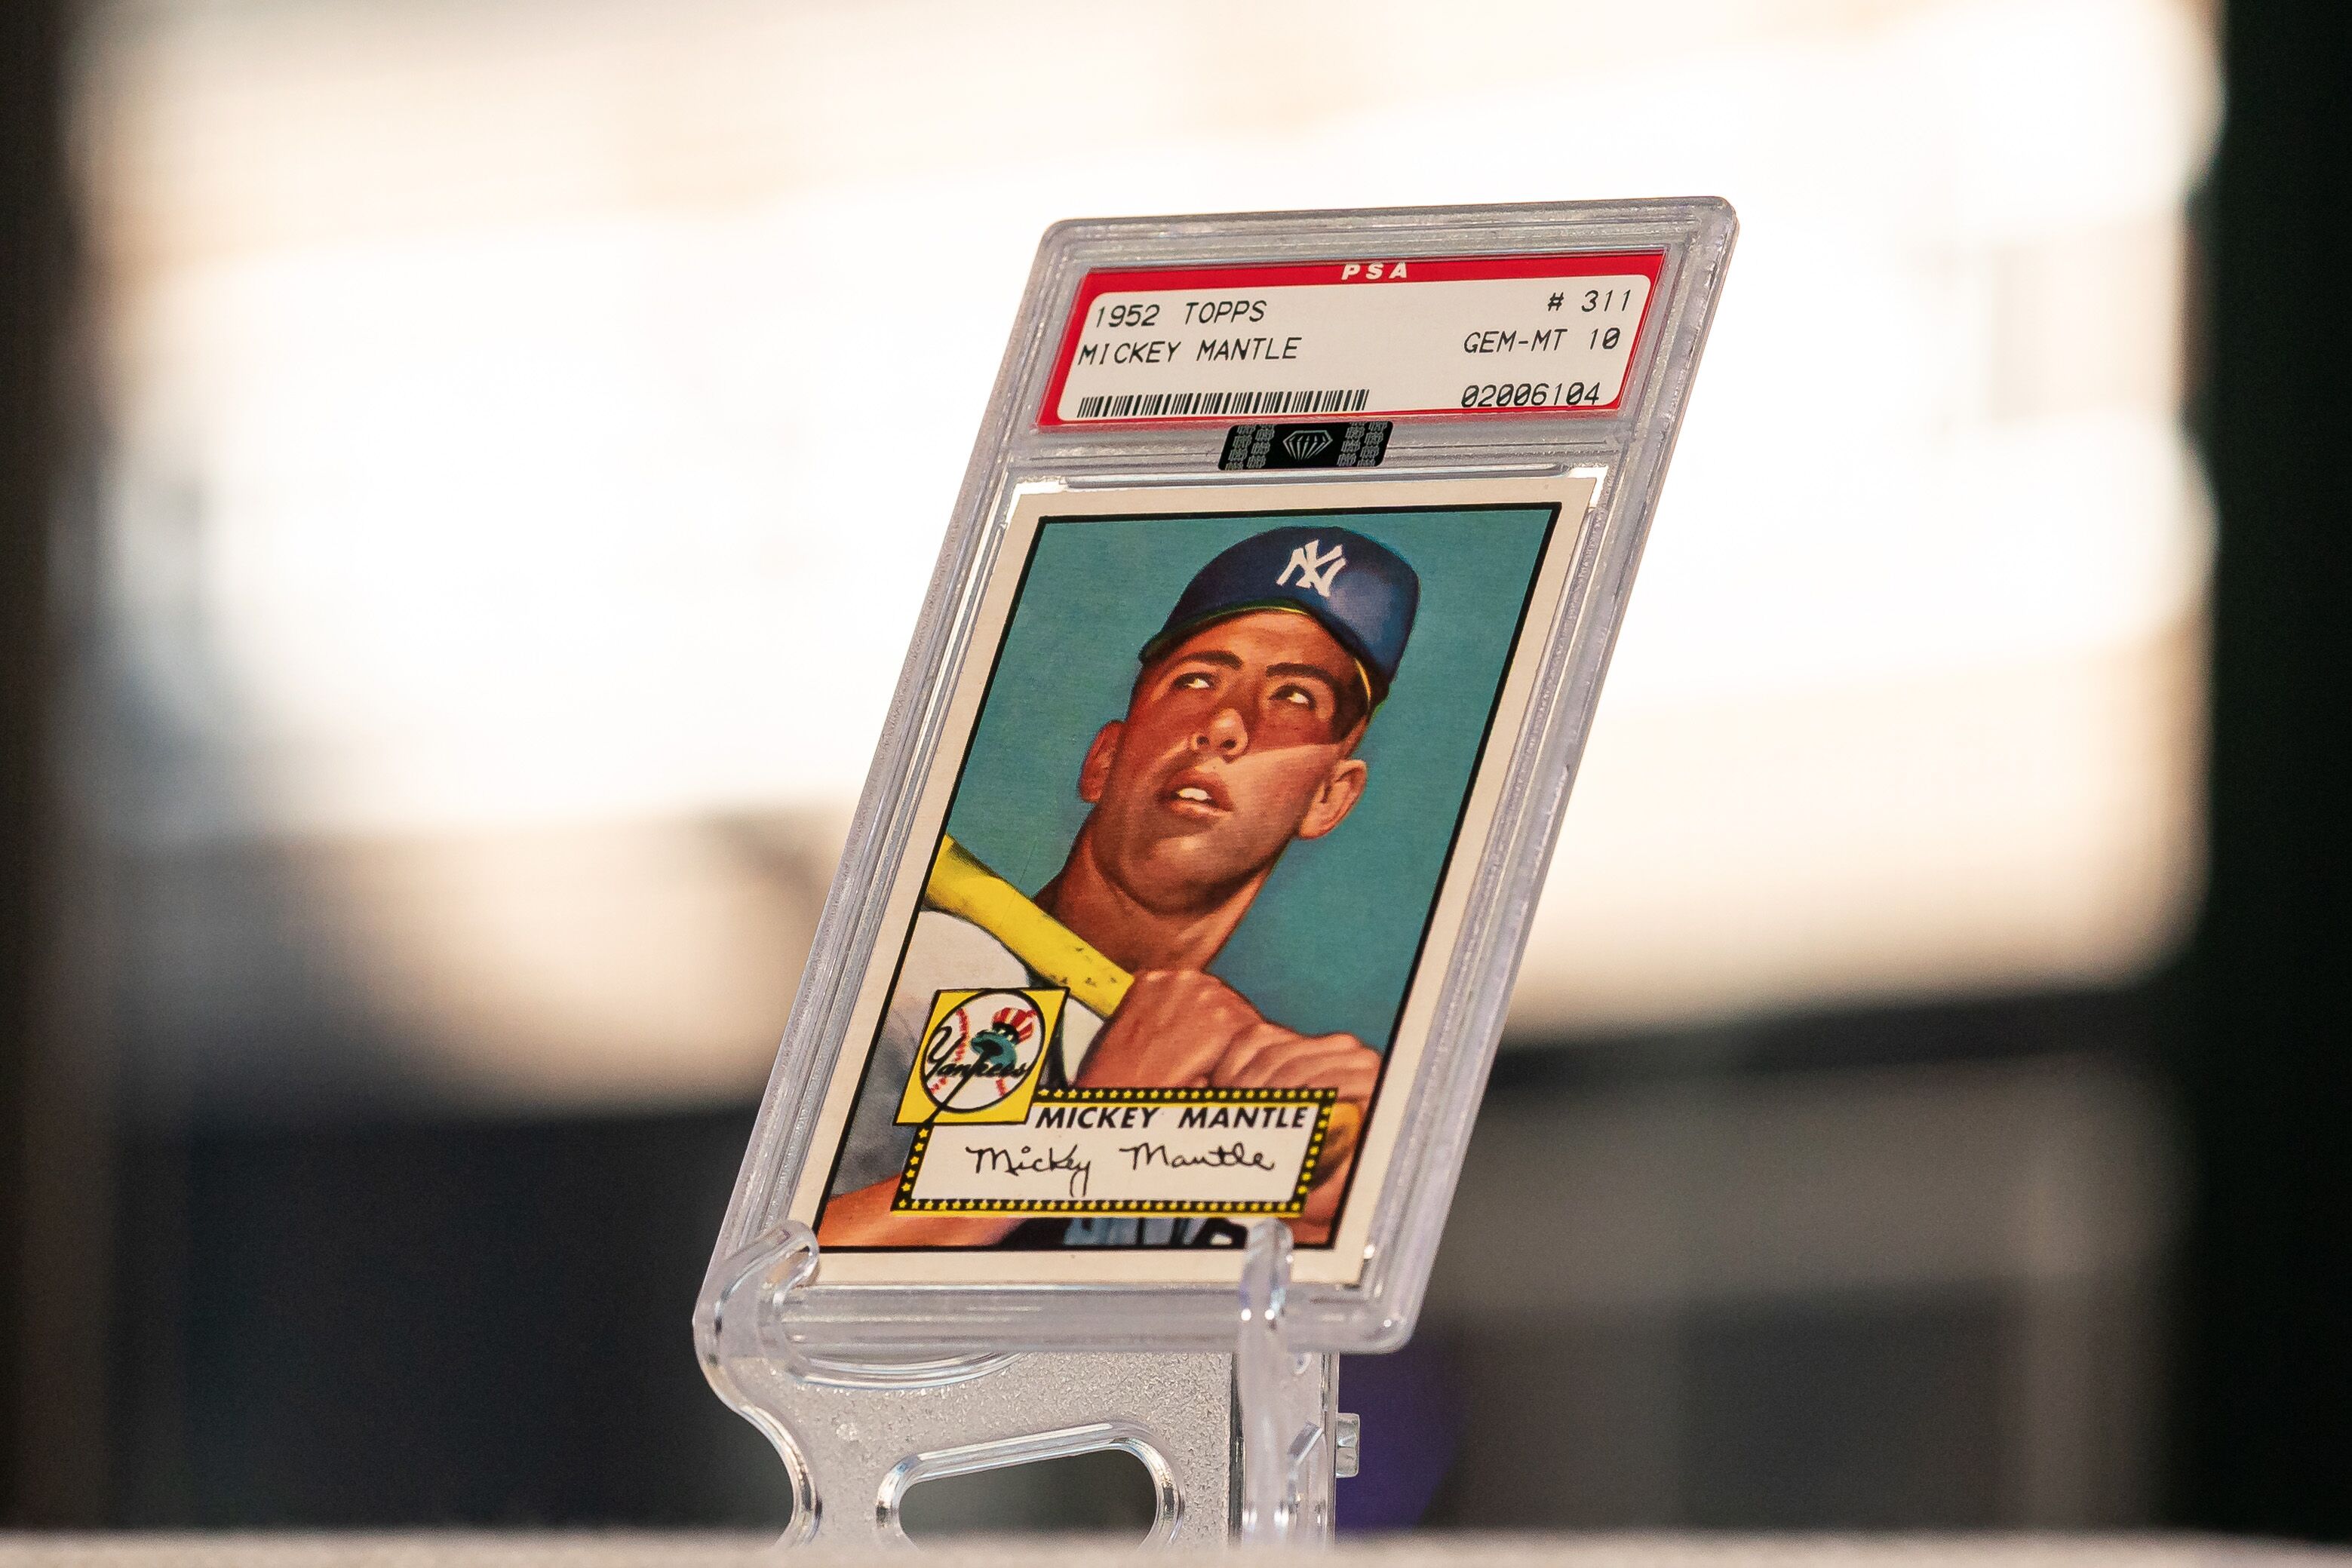 Mickey Mantle rookie card sold at auction for record $12.6 million